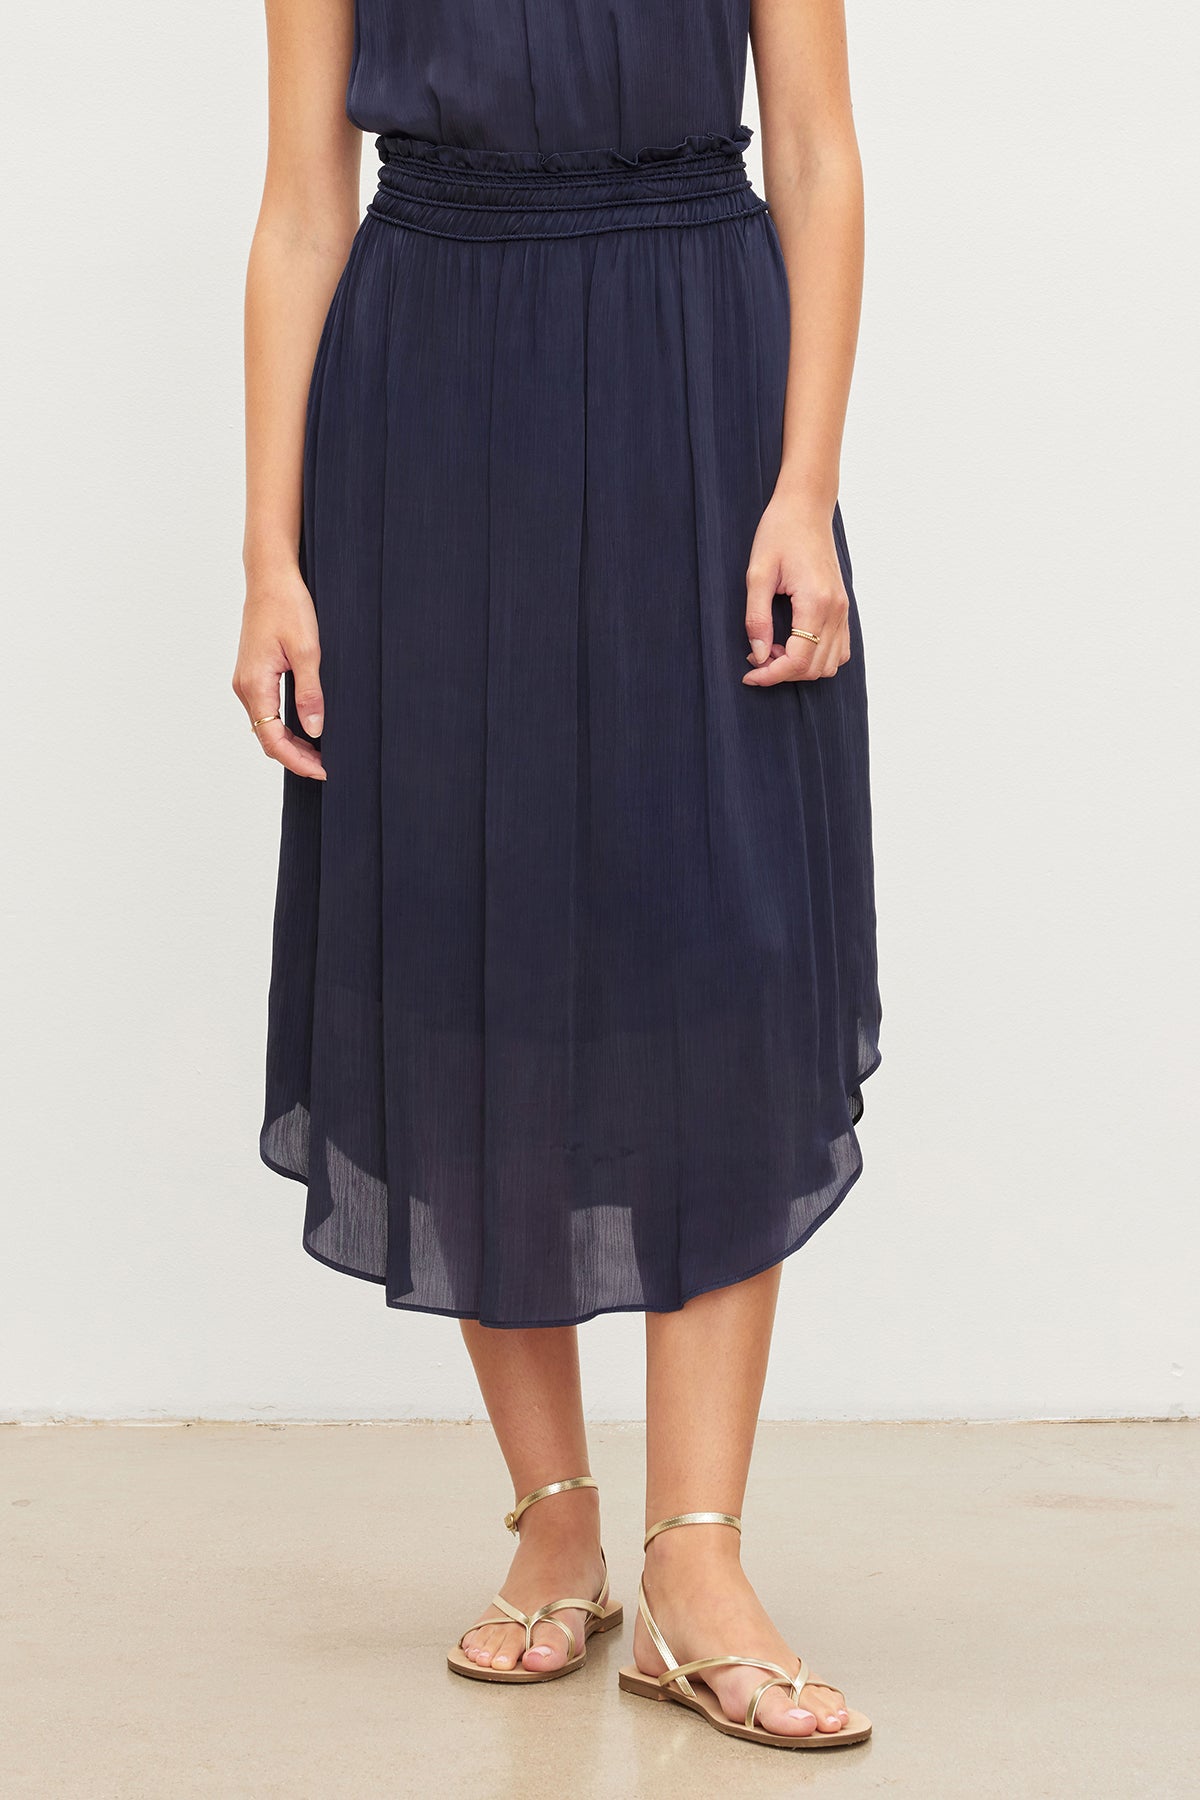   Woman wearing a navy blue DIMI SMOCKED SKIRT with inseam pockets and gold sandals by Velvet by Graham & Spencer. 